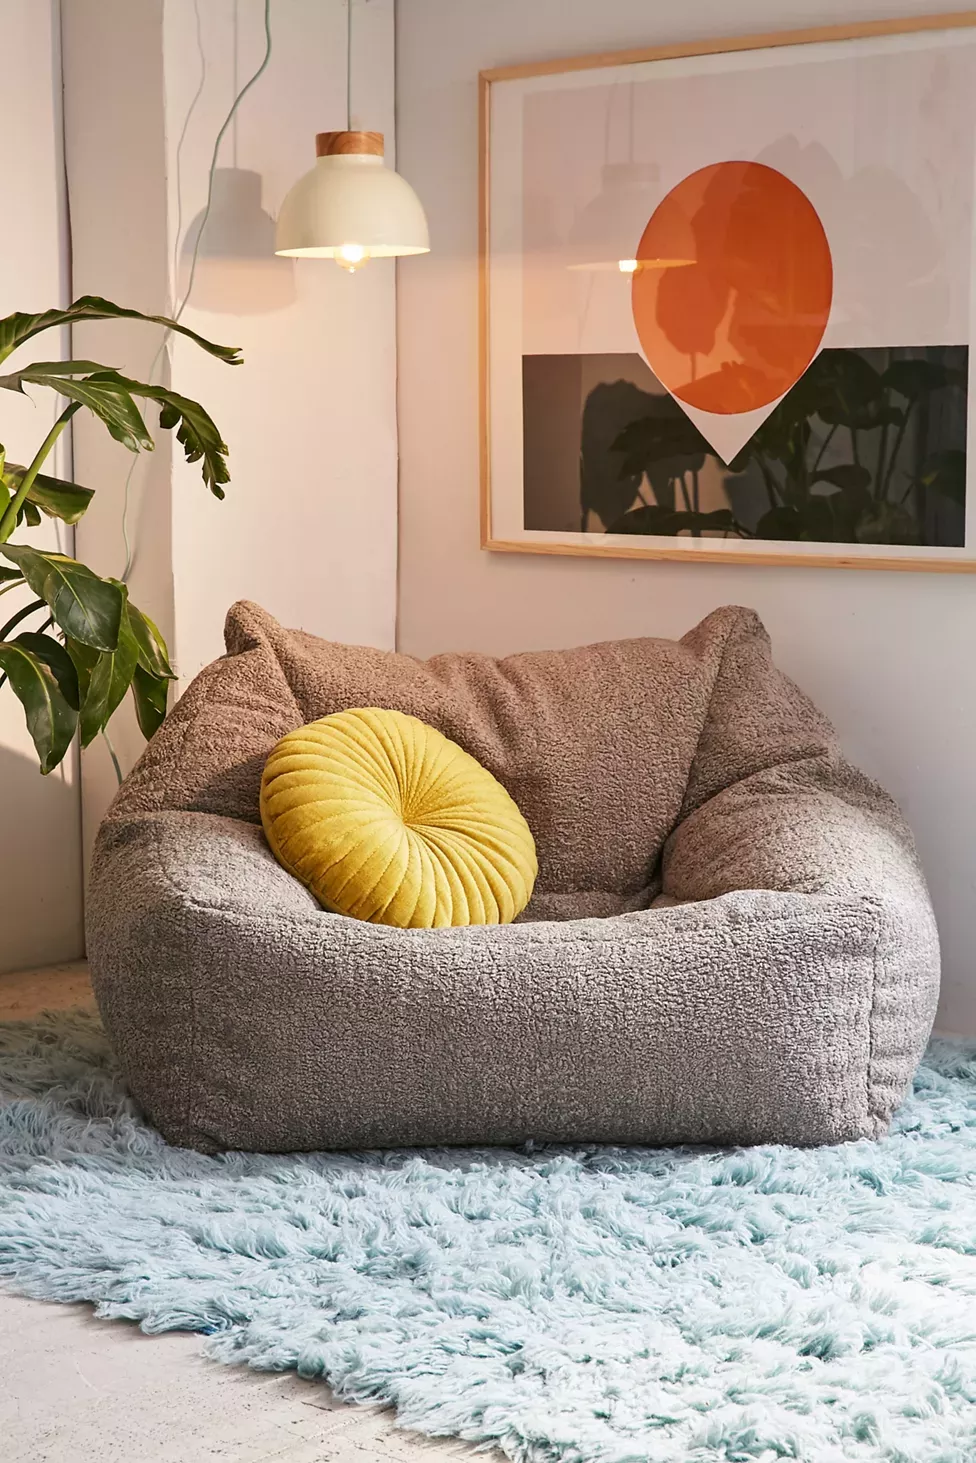 Creative Ways to Use Bean Bag Chairs in
Your Home